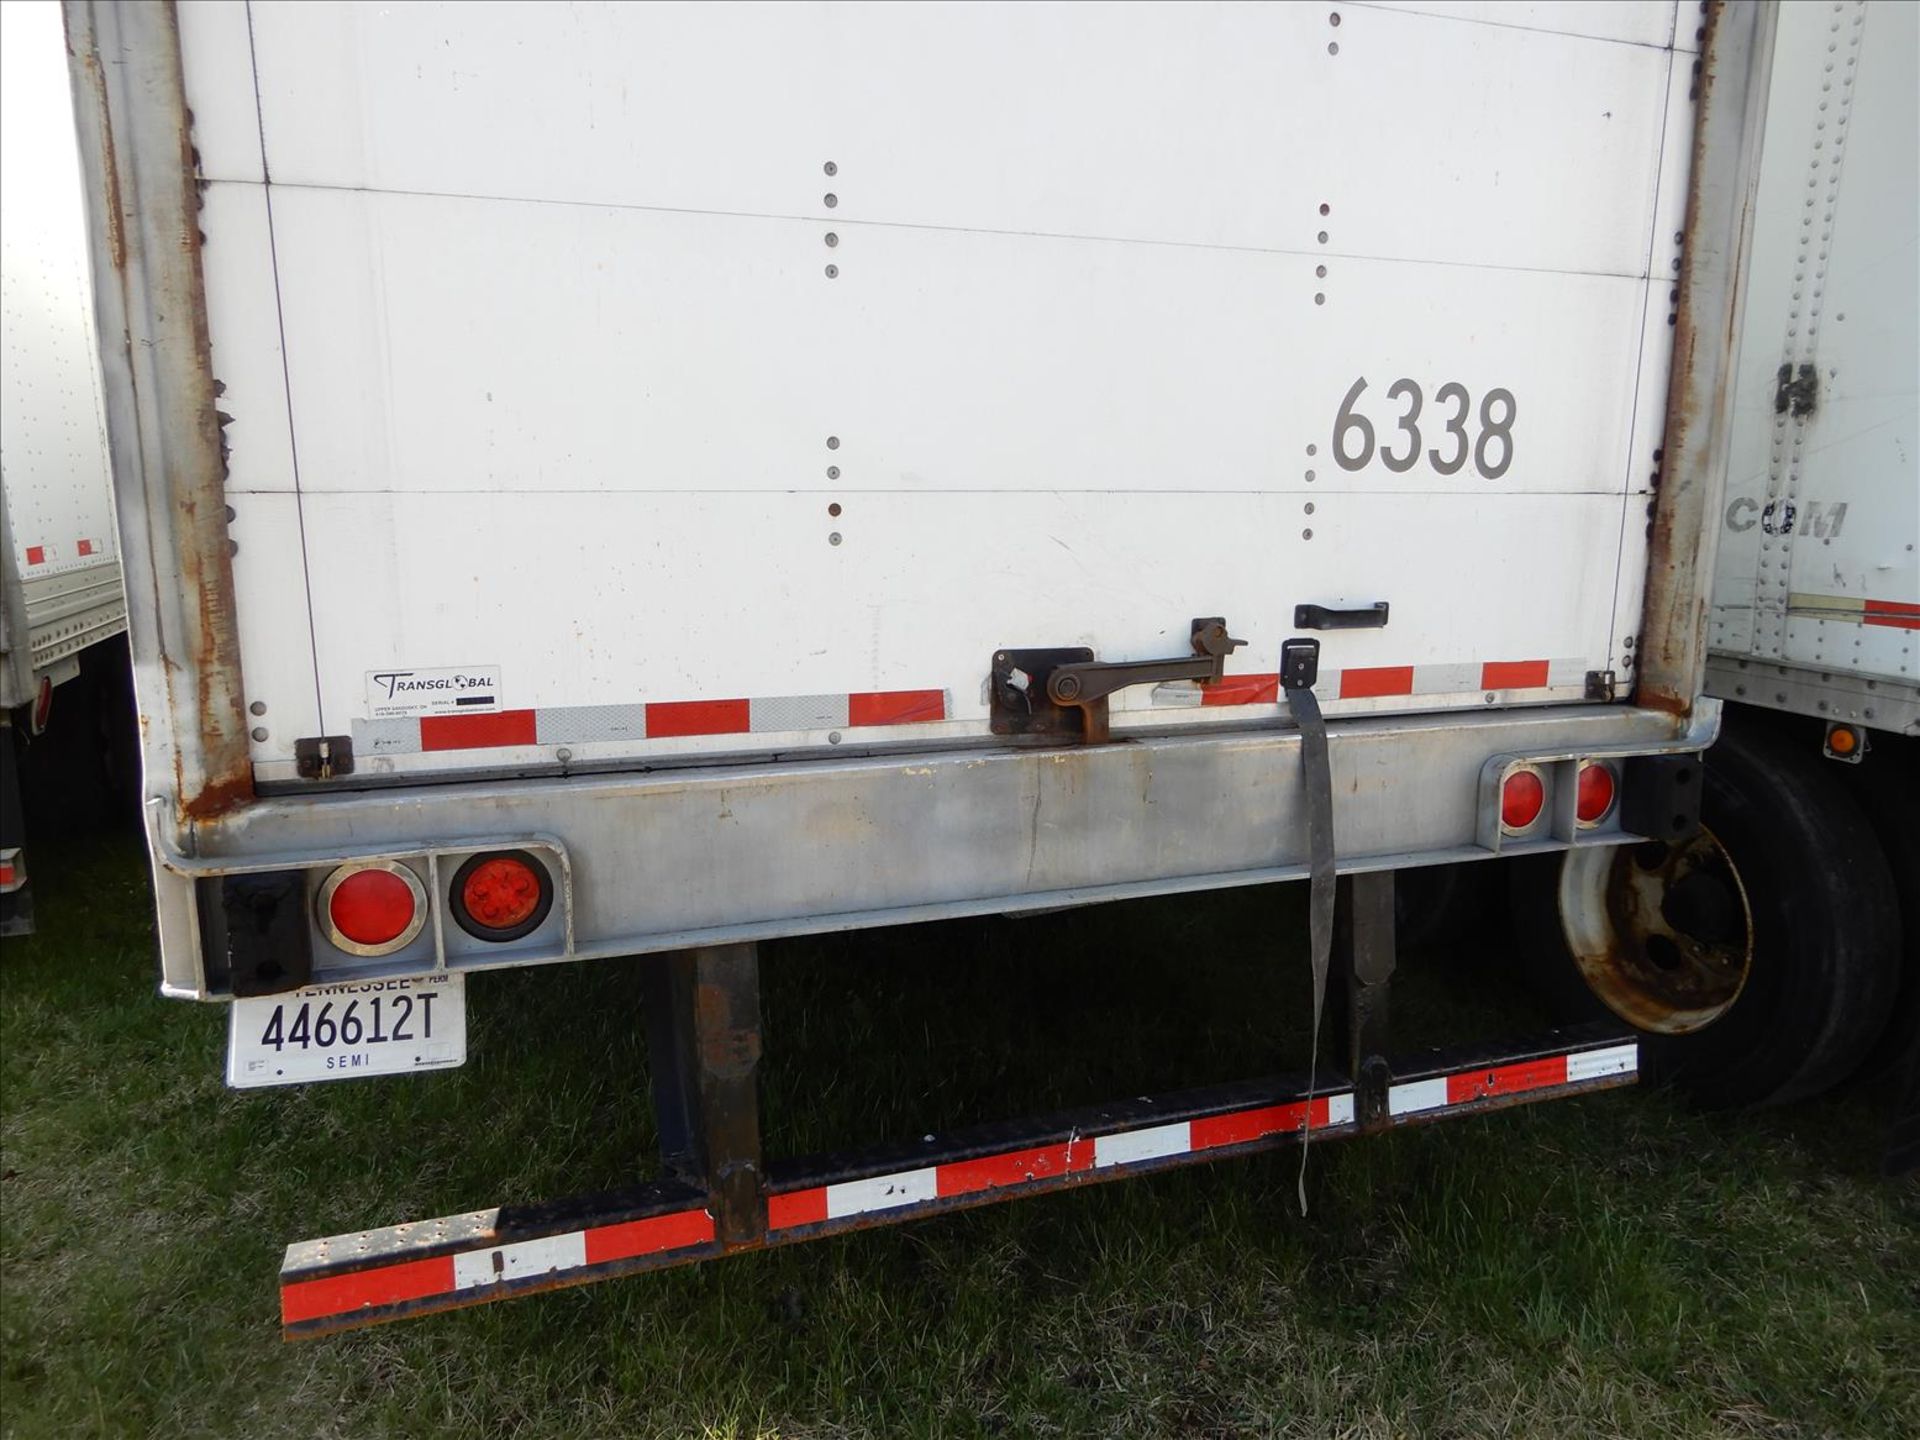 2014 Utility Trailer - Located in Indianapolis, IN - Image 17 of 27